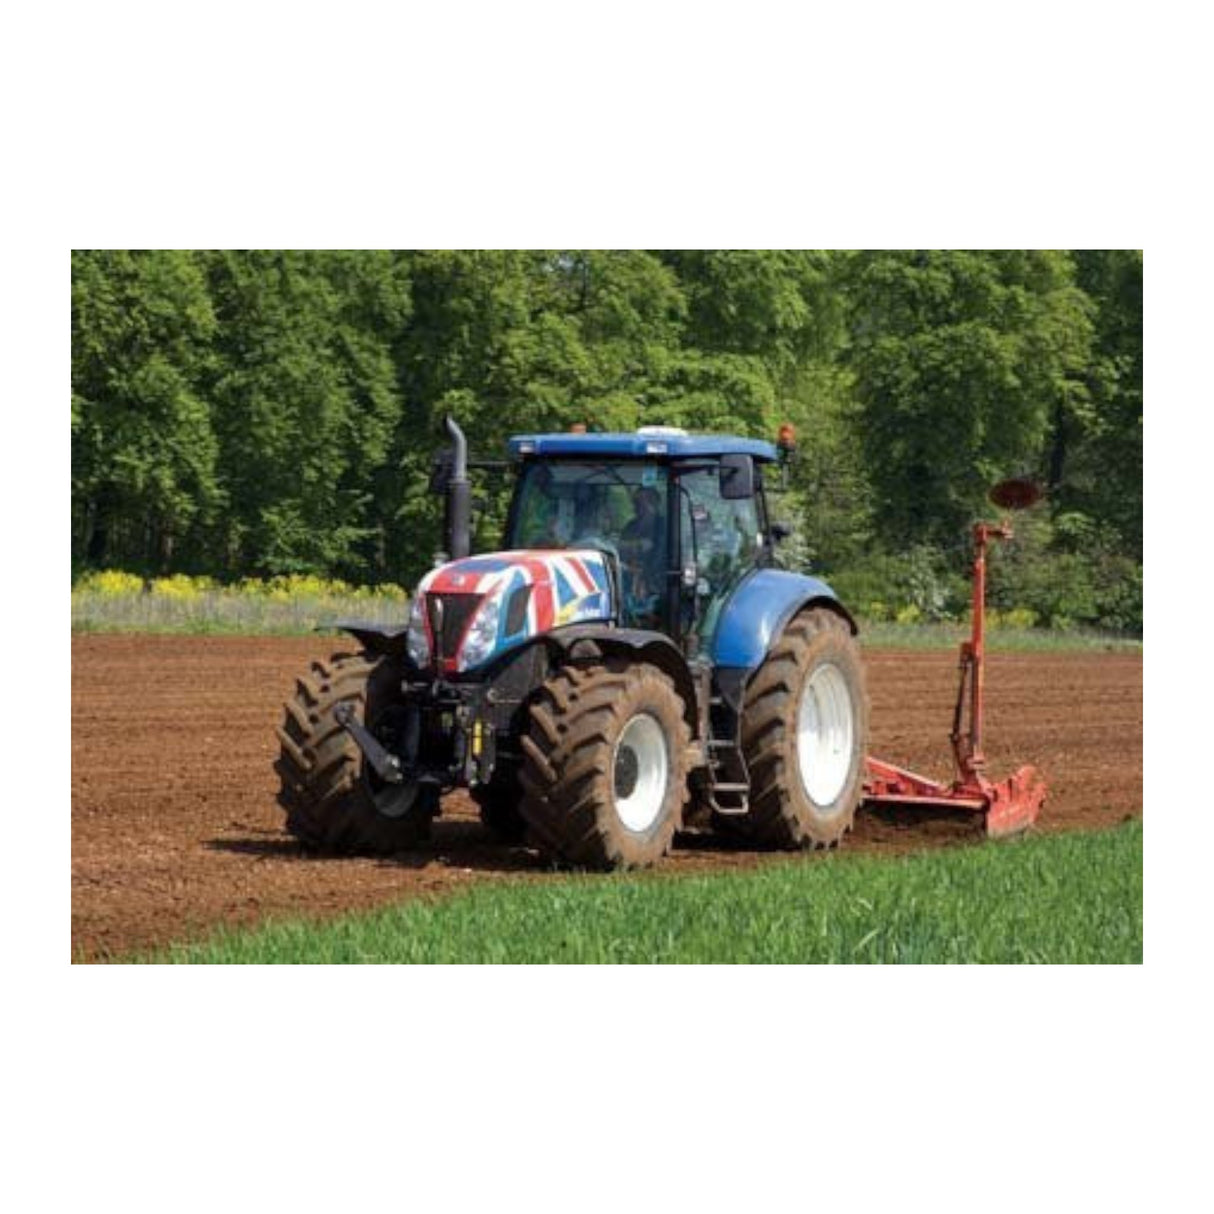 CSP Greetings Cards - Tractor